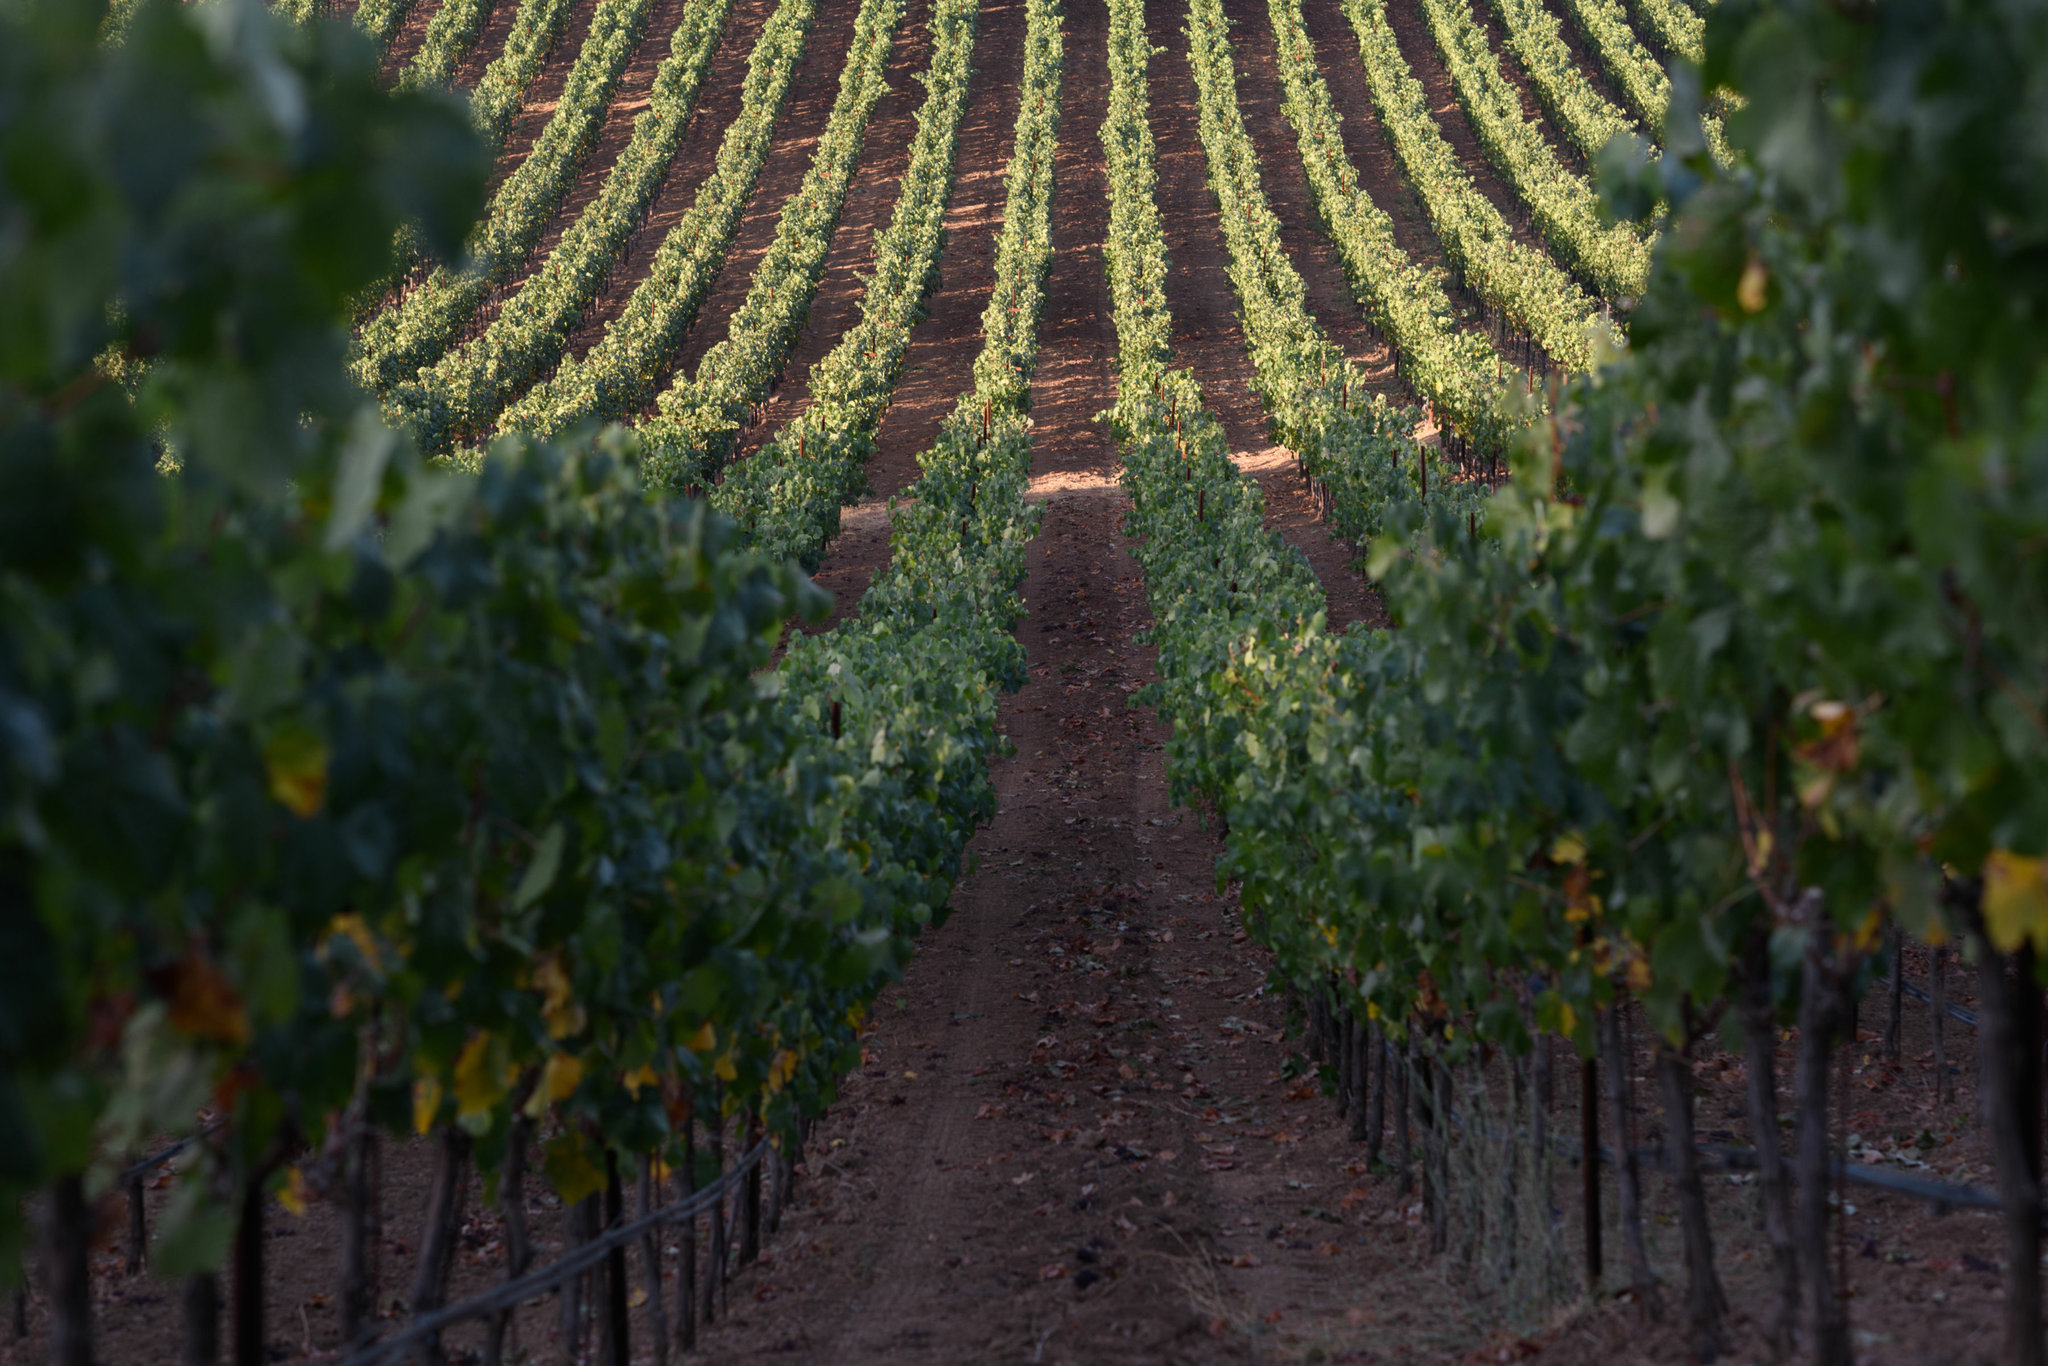 photo taken from within rows of Hamel grapevines